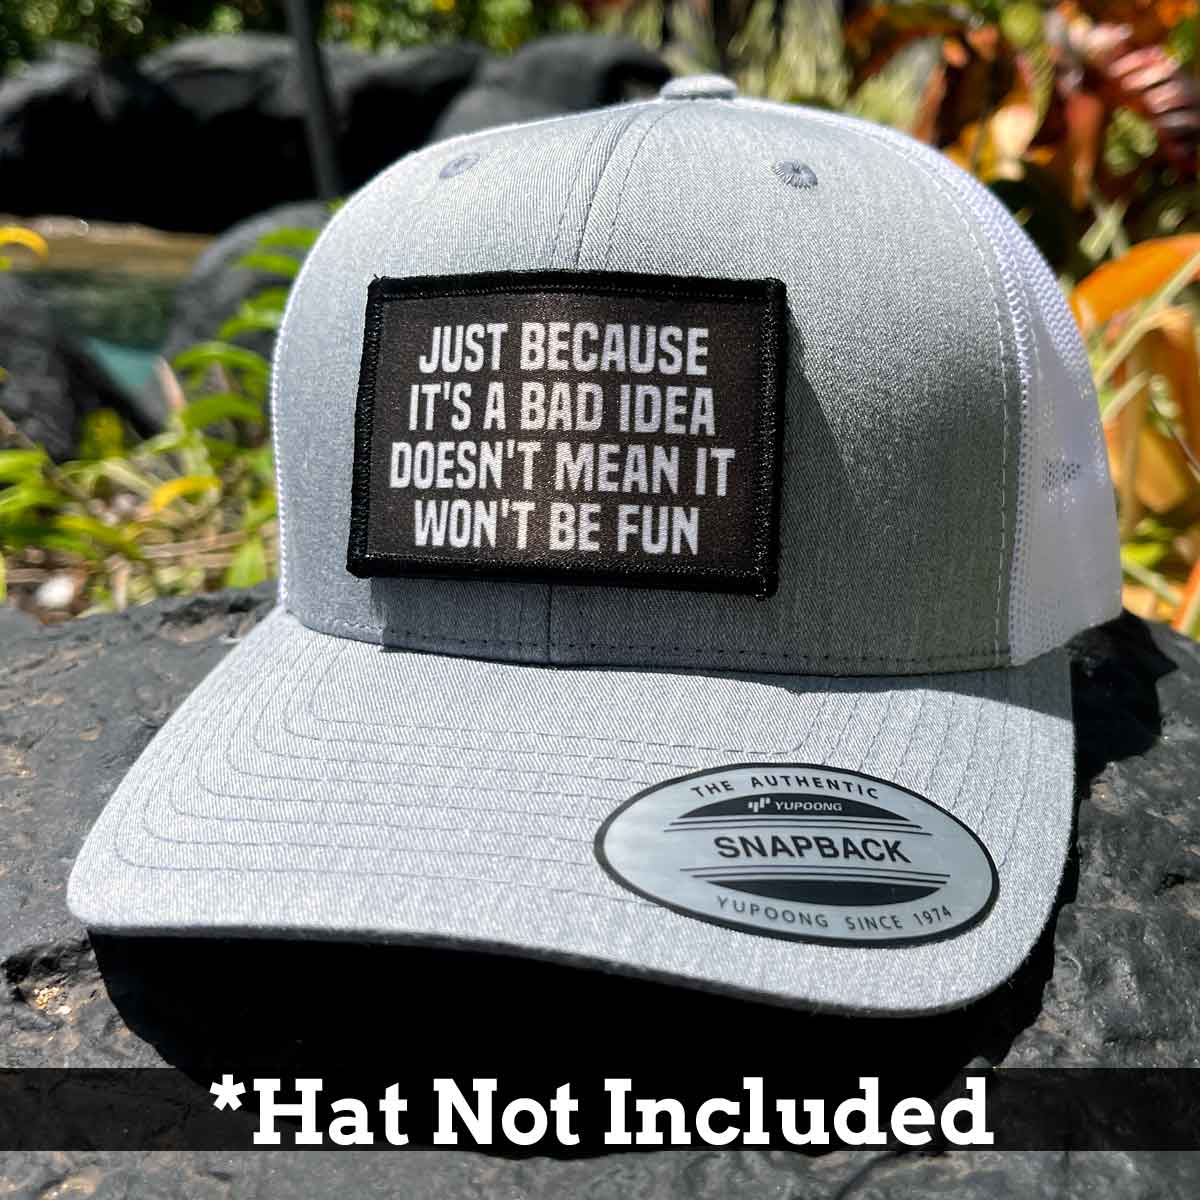 Just Because It's A Bad Idea Doesn't Mean It Won't Be Fun - Removable Patch - Pull Patch - Removable Patches For Authentic Flexfit and Snapback Hats